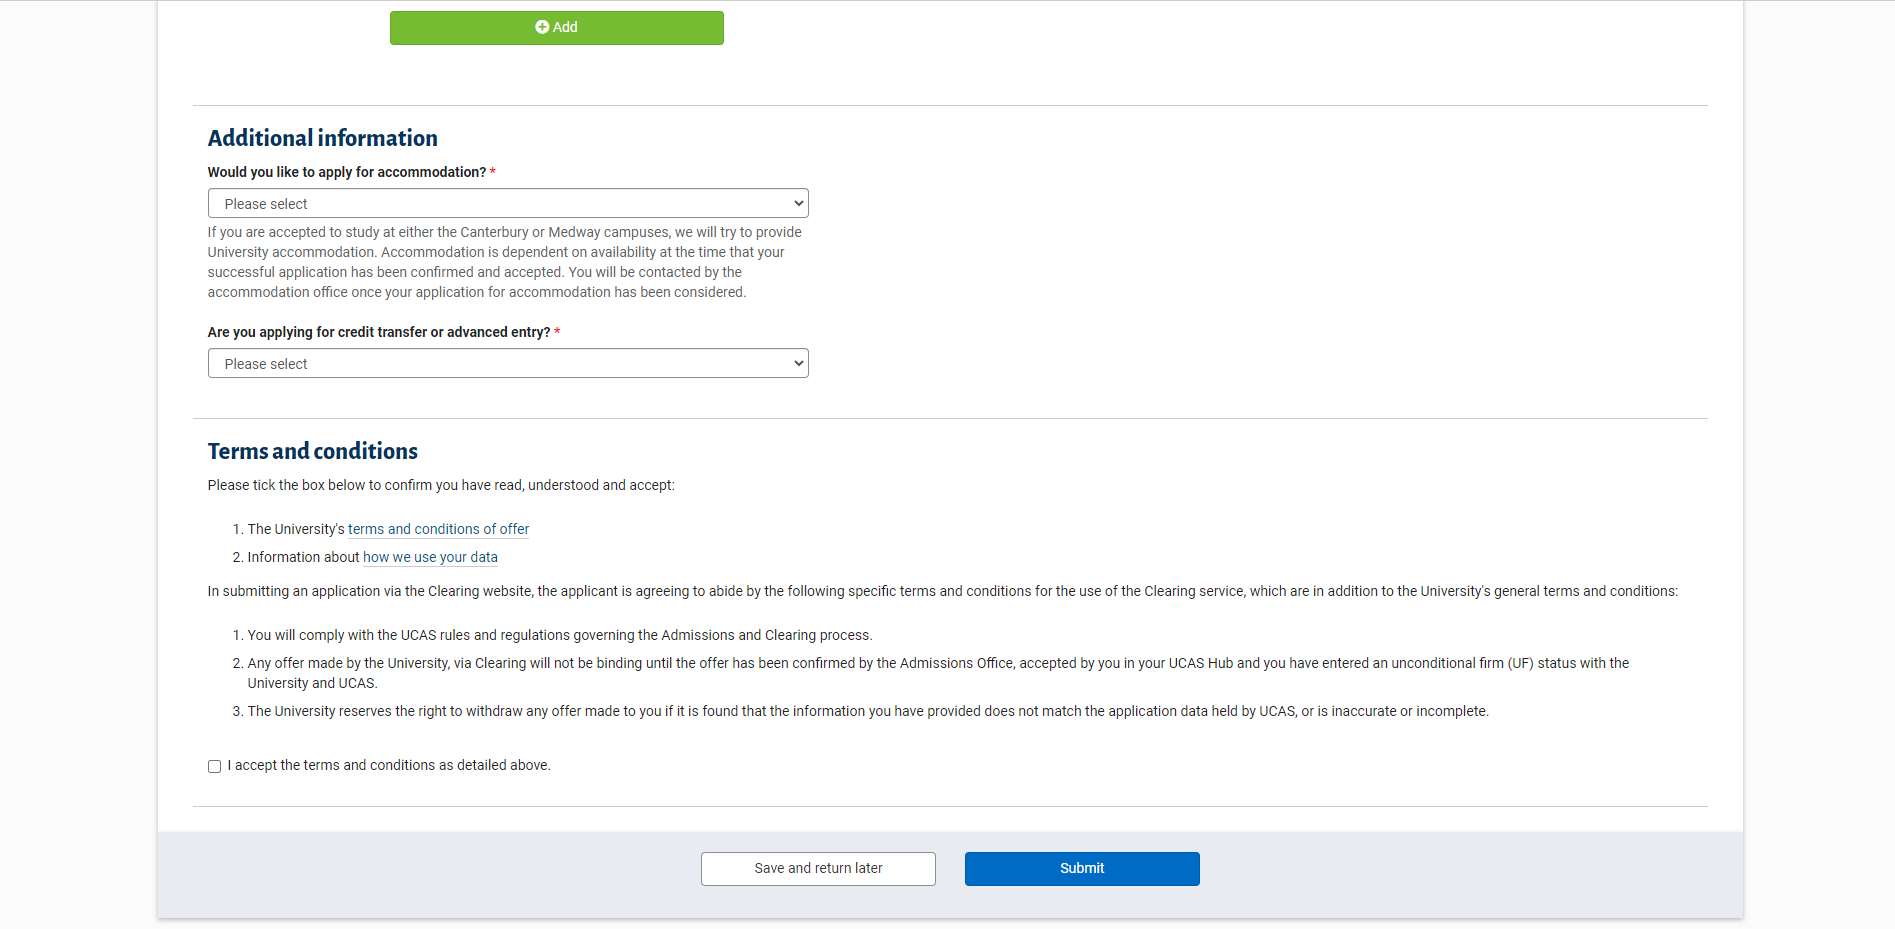 Screenshot of accommodation question in Clearing application